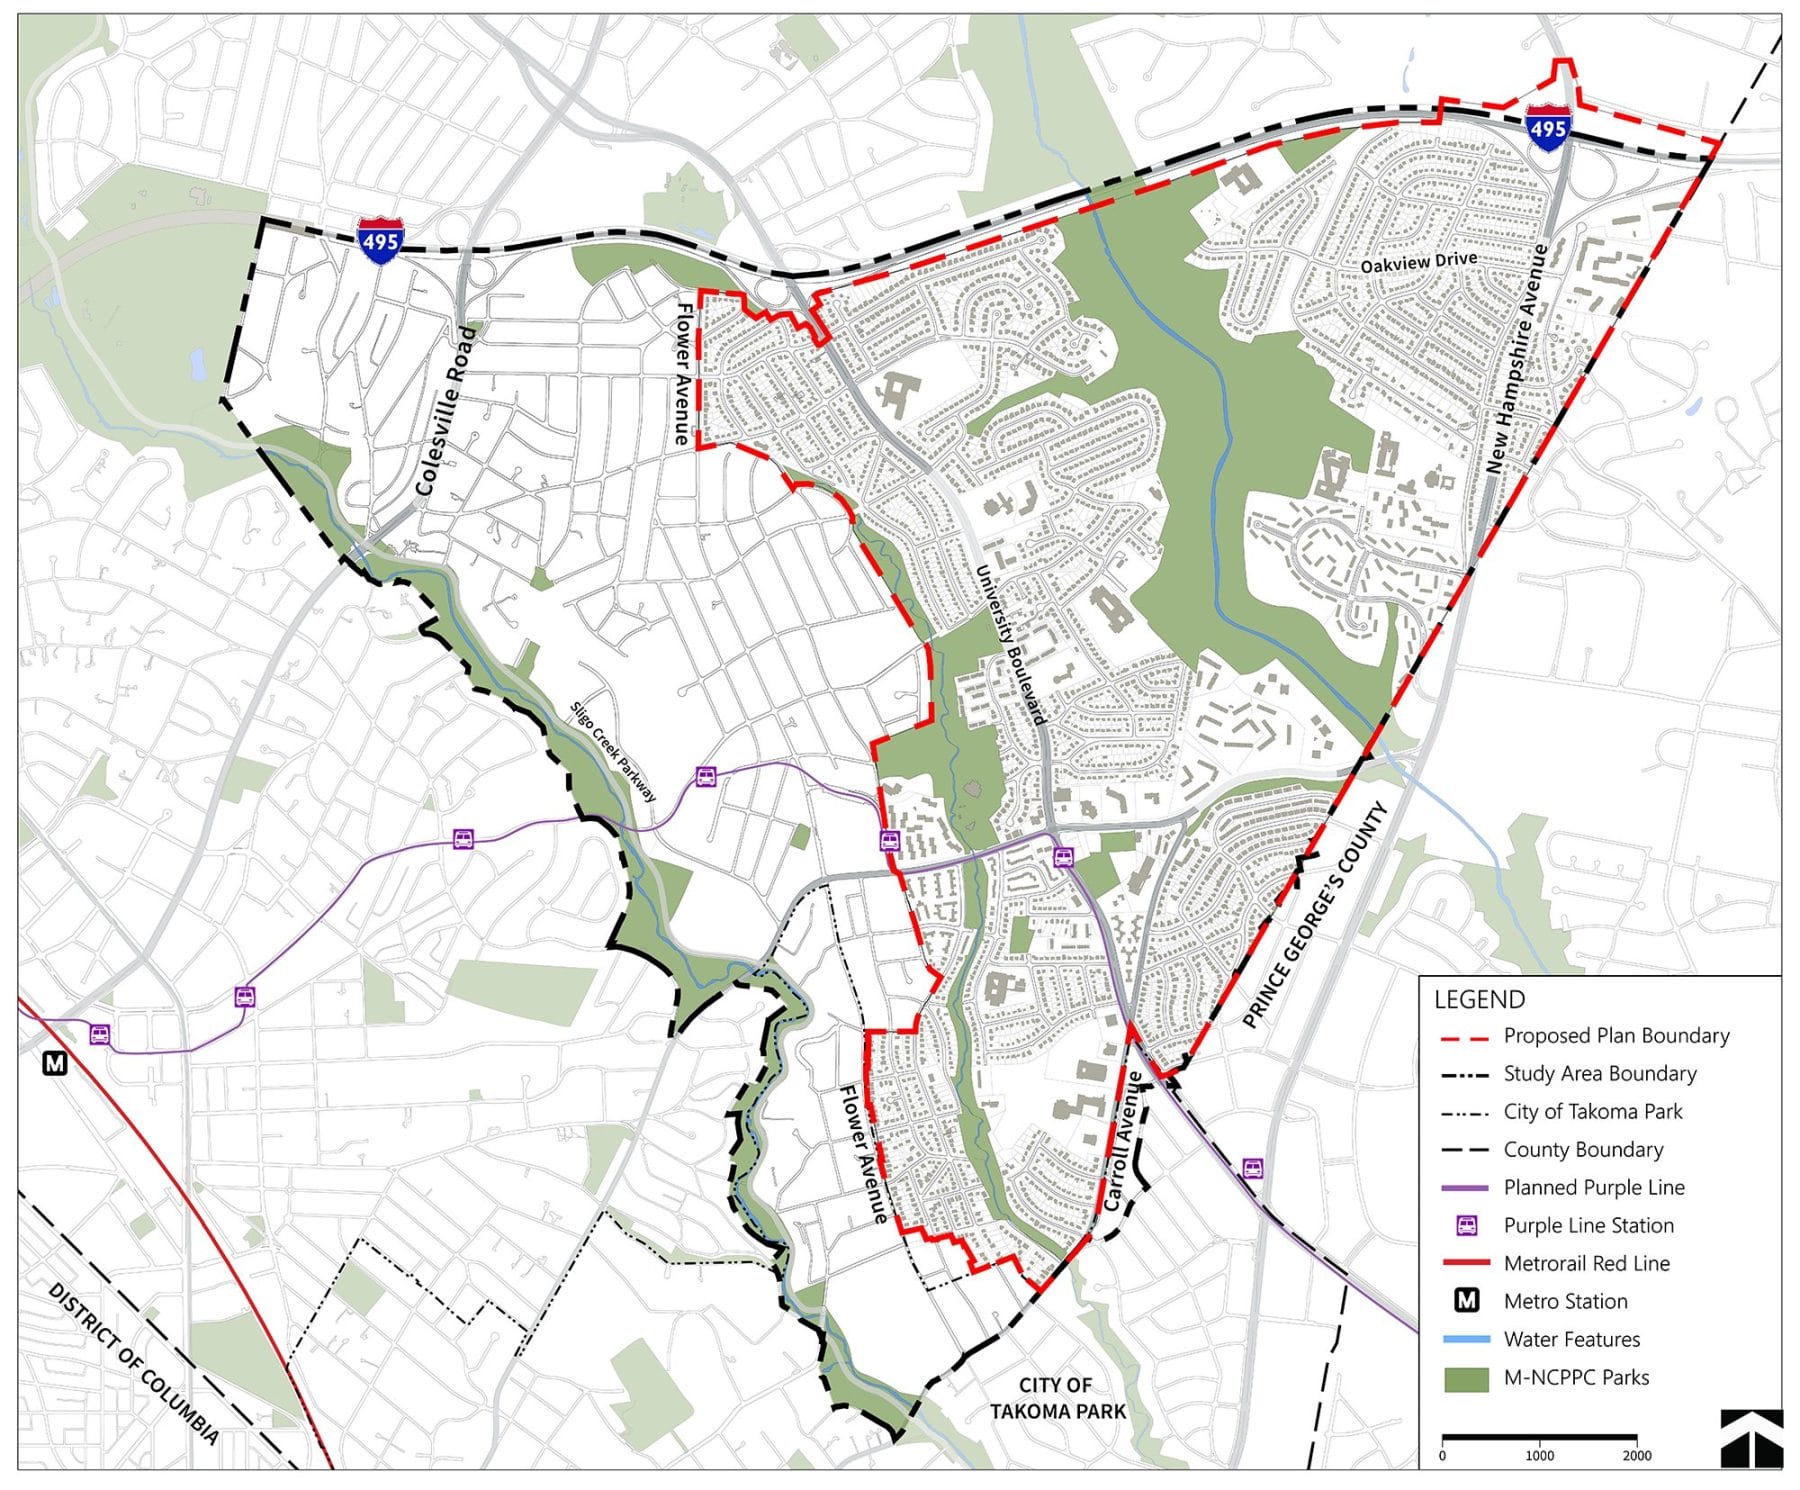 Map of the Proposed Plan area in relation to the larger study area. The Study Area extends from Sligo Creek east to the Prince George’s County line, inside the Capital Beltway (Interstate 495). The Proposed Plan Area extends east from the Prince George's County Border inside the Capital Beltway. As the county border intersects with University Boulevard, the boundary moves north to Carroll Avenue. From there the boundary goes north, between Garland and Greenwood Avenues. Ultimately the boundary aligns with Flower Avenue, north until, Wabash Avenue where it heads east to Garland Avenue. From there, the boundary follows Garland Avenue and then turns west on Glenview Avenue. The boundary follows Glenview until its end and then crosses Piney Branch north to Arliss Street, where it meets Long Branch-Arliss Neghborhood Park and follows the Long Branch stream valley north to E- Franklin Avenue, where it moves west and then north Along Flower avenue, an d east along Granville Drive. The north part of the boundary follows just south of the 495 beltway, and includes the interchange with New Hampshire Avenue.